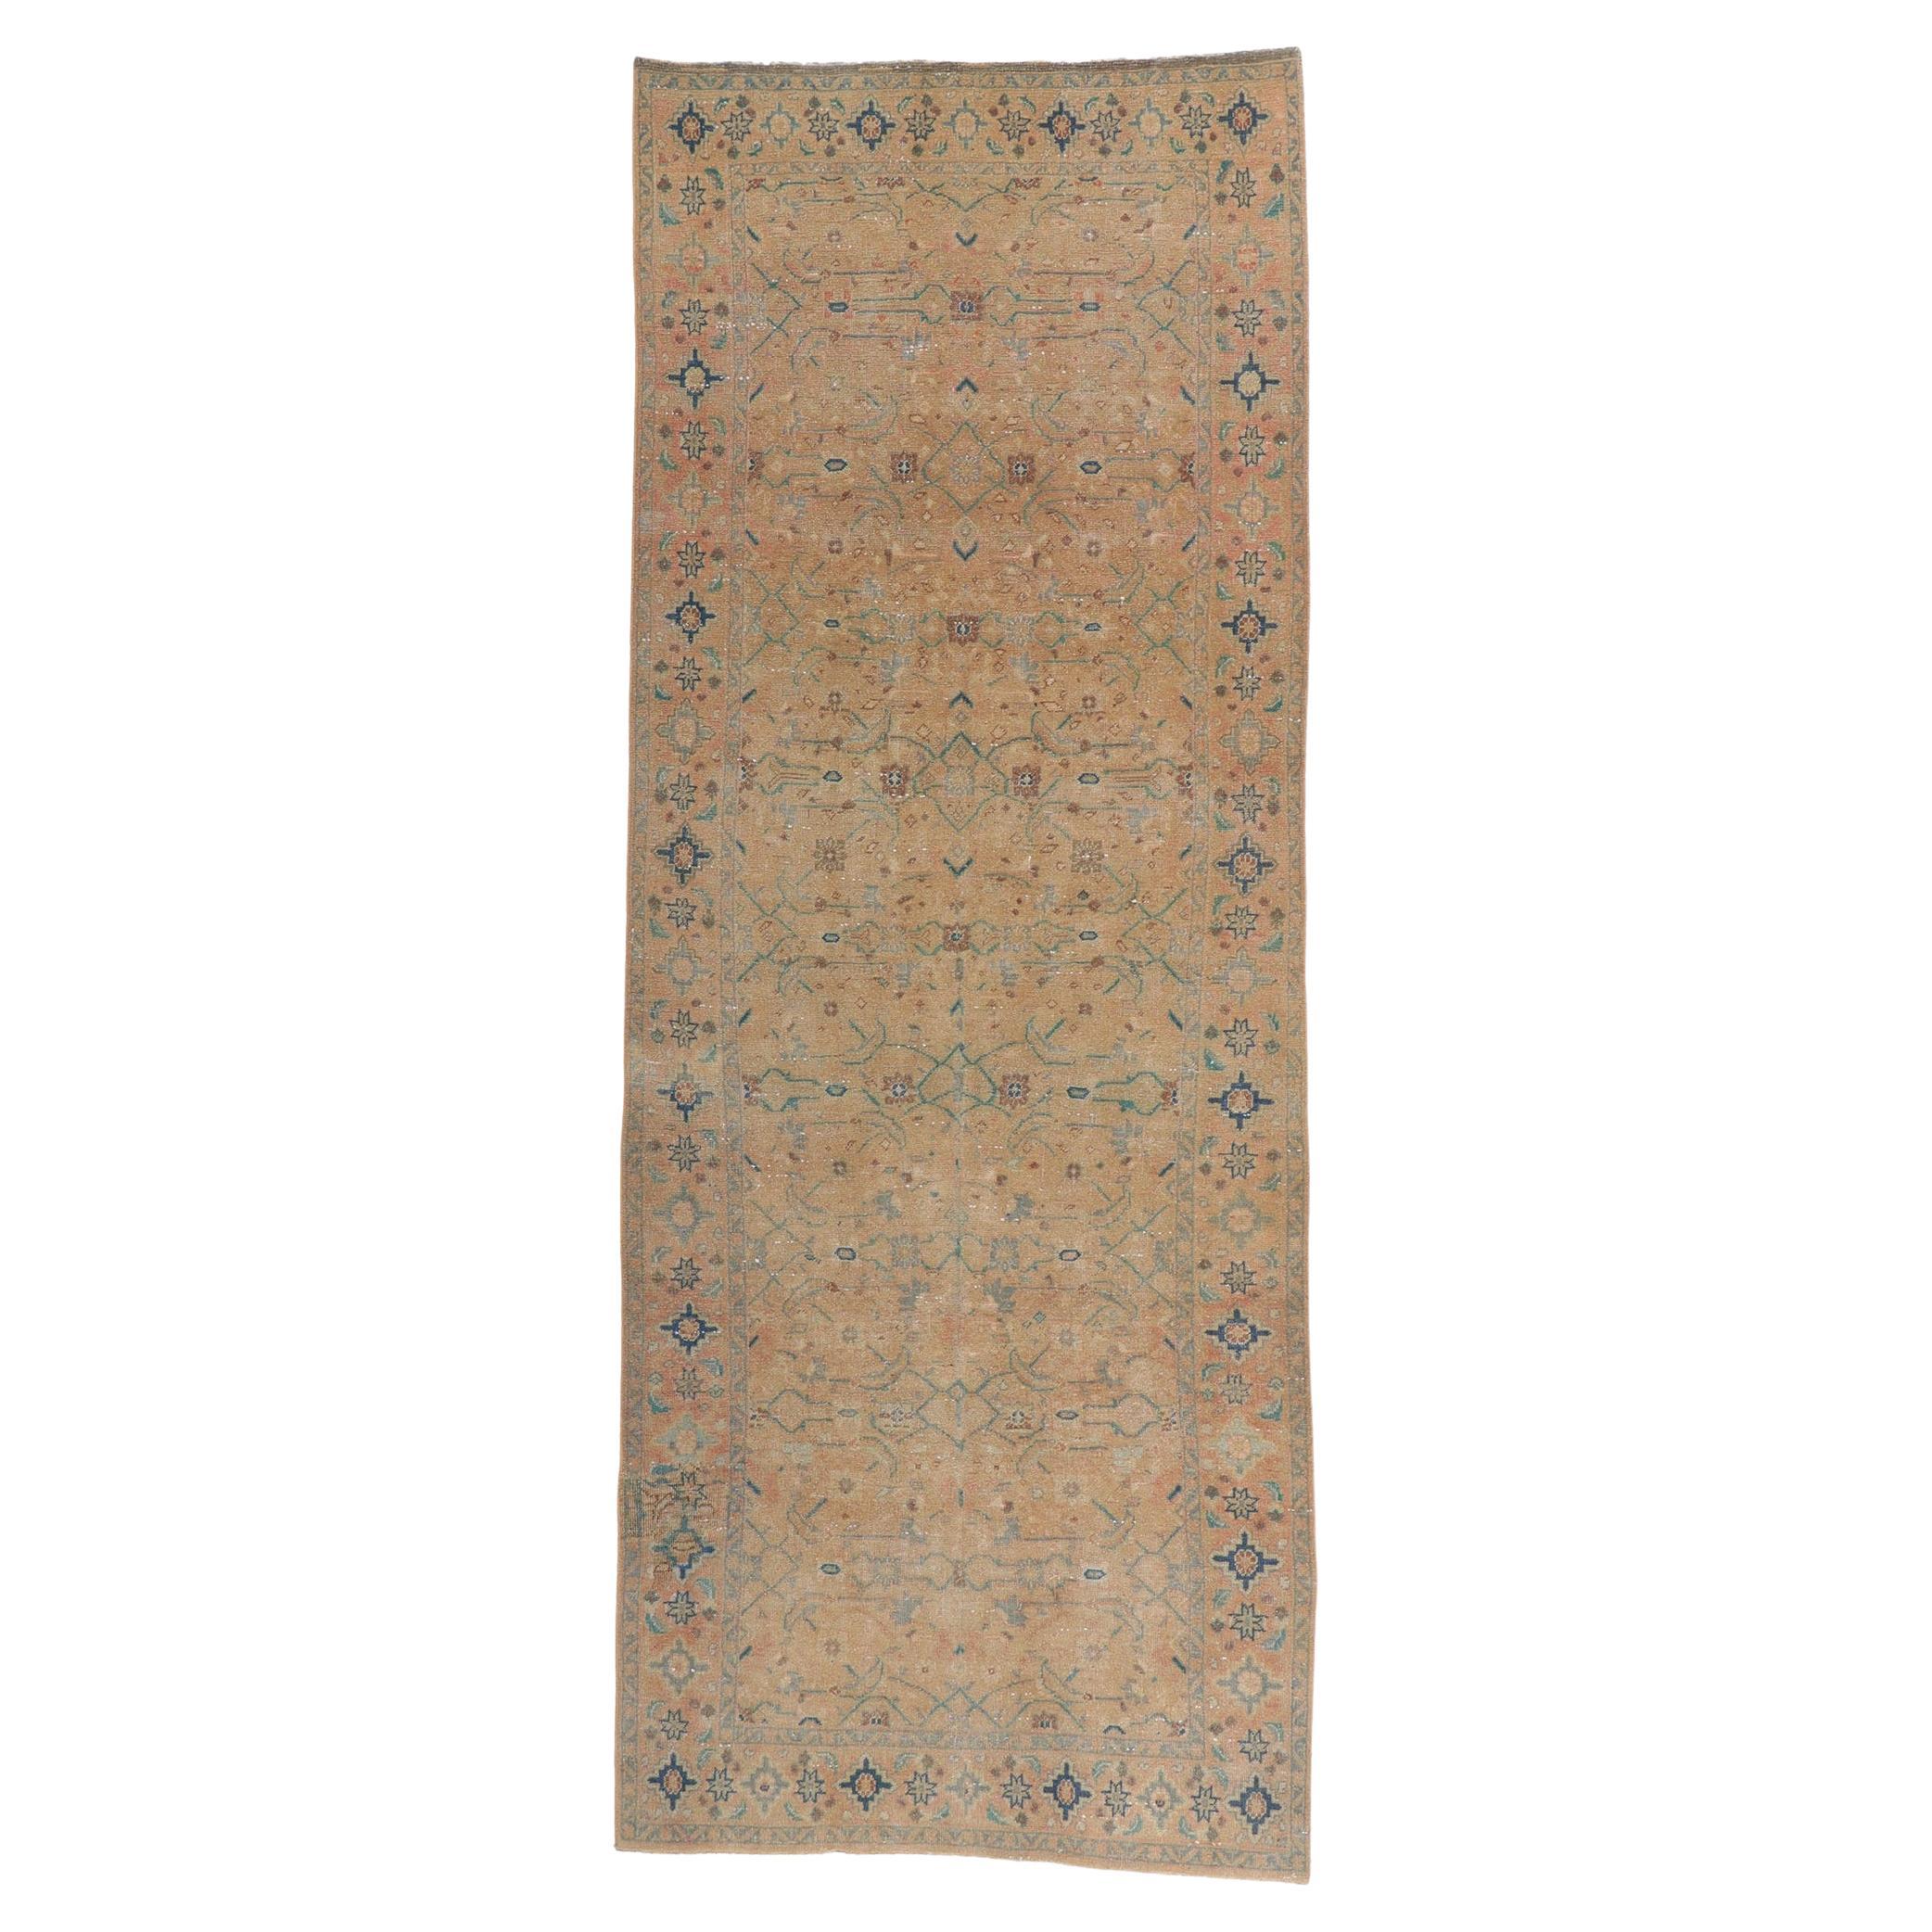 Distressed Vintage Persian Tabriz Rug, Nostalgic Charm Meets Relaxed Refinement